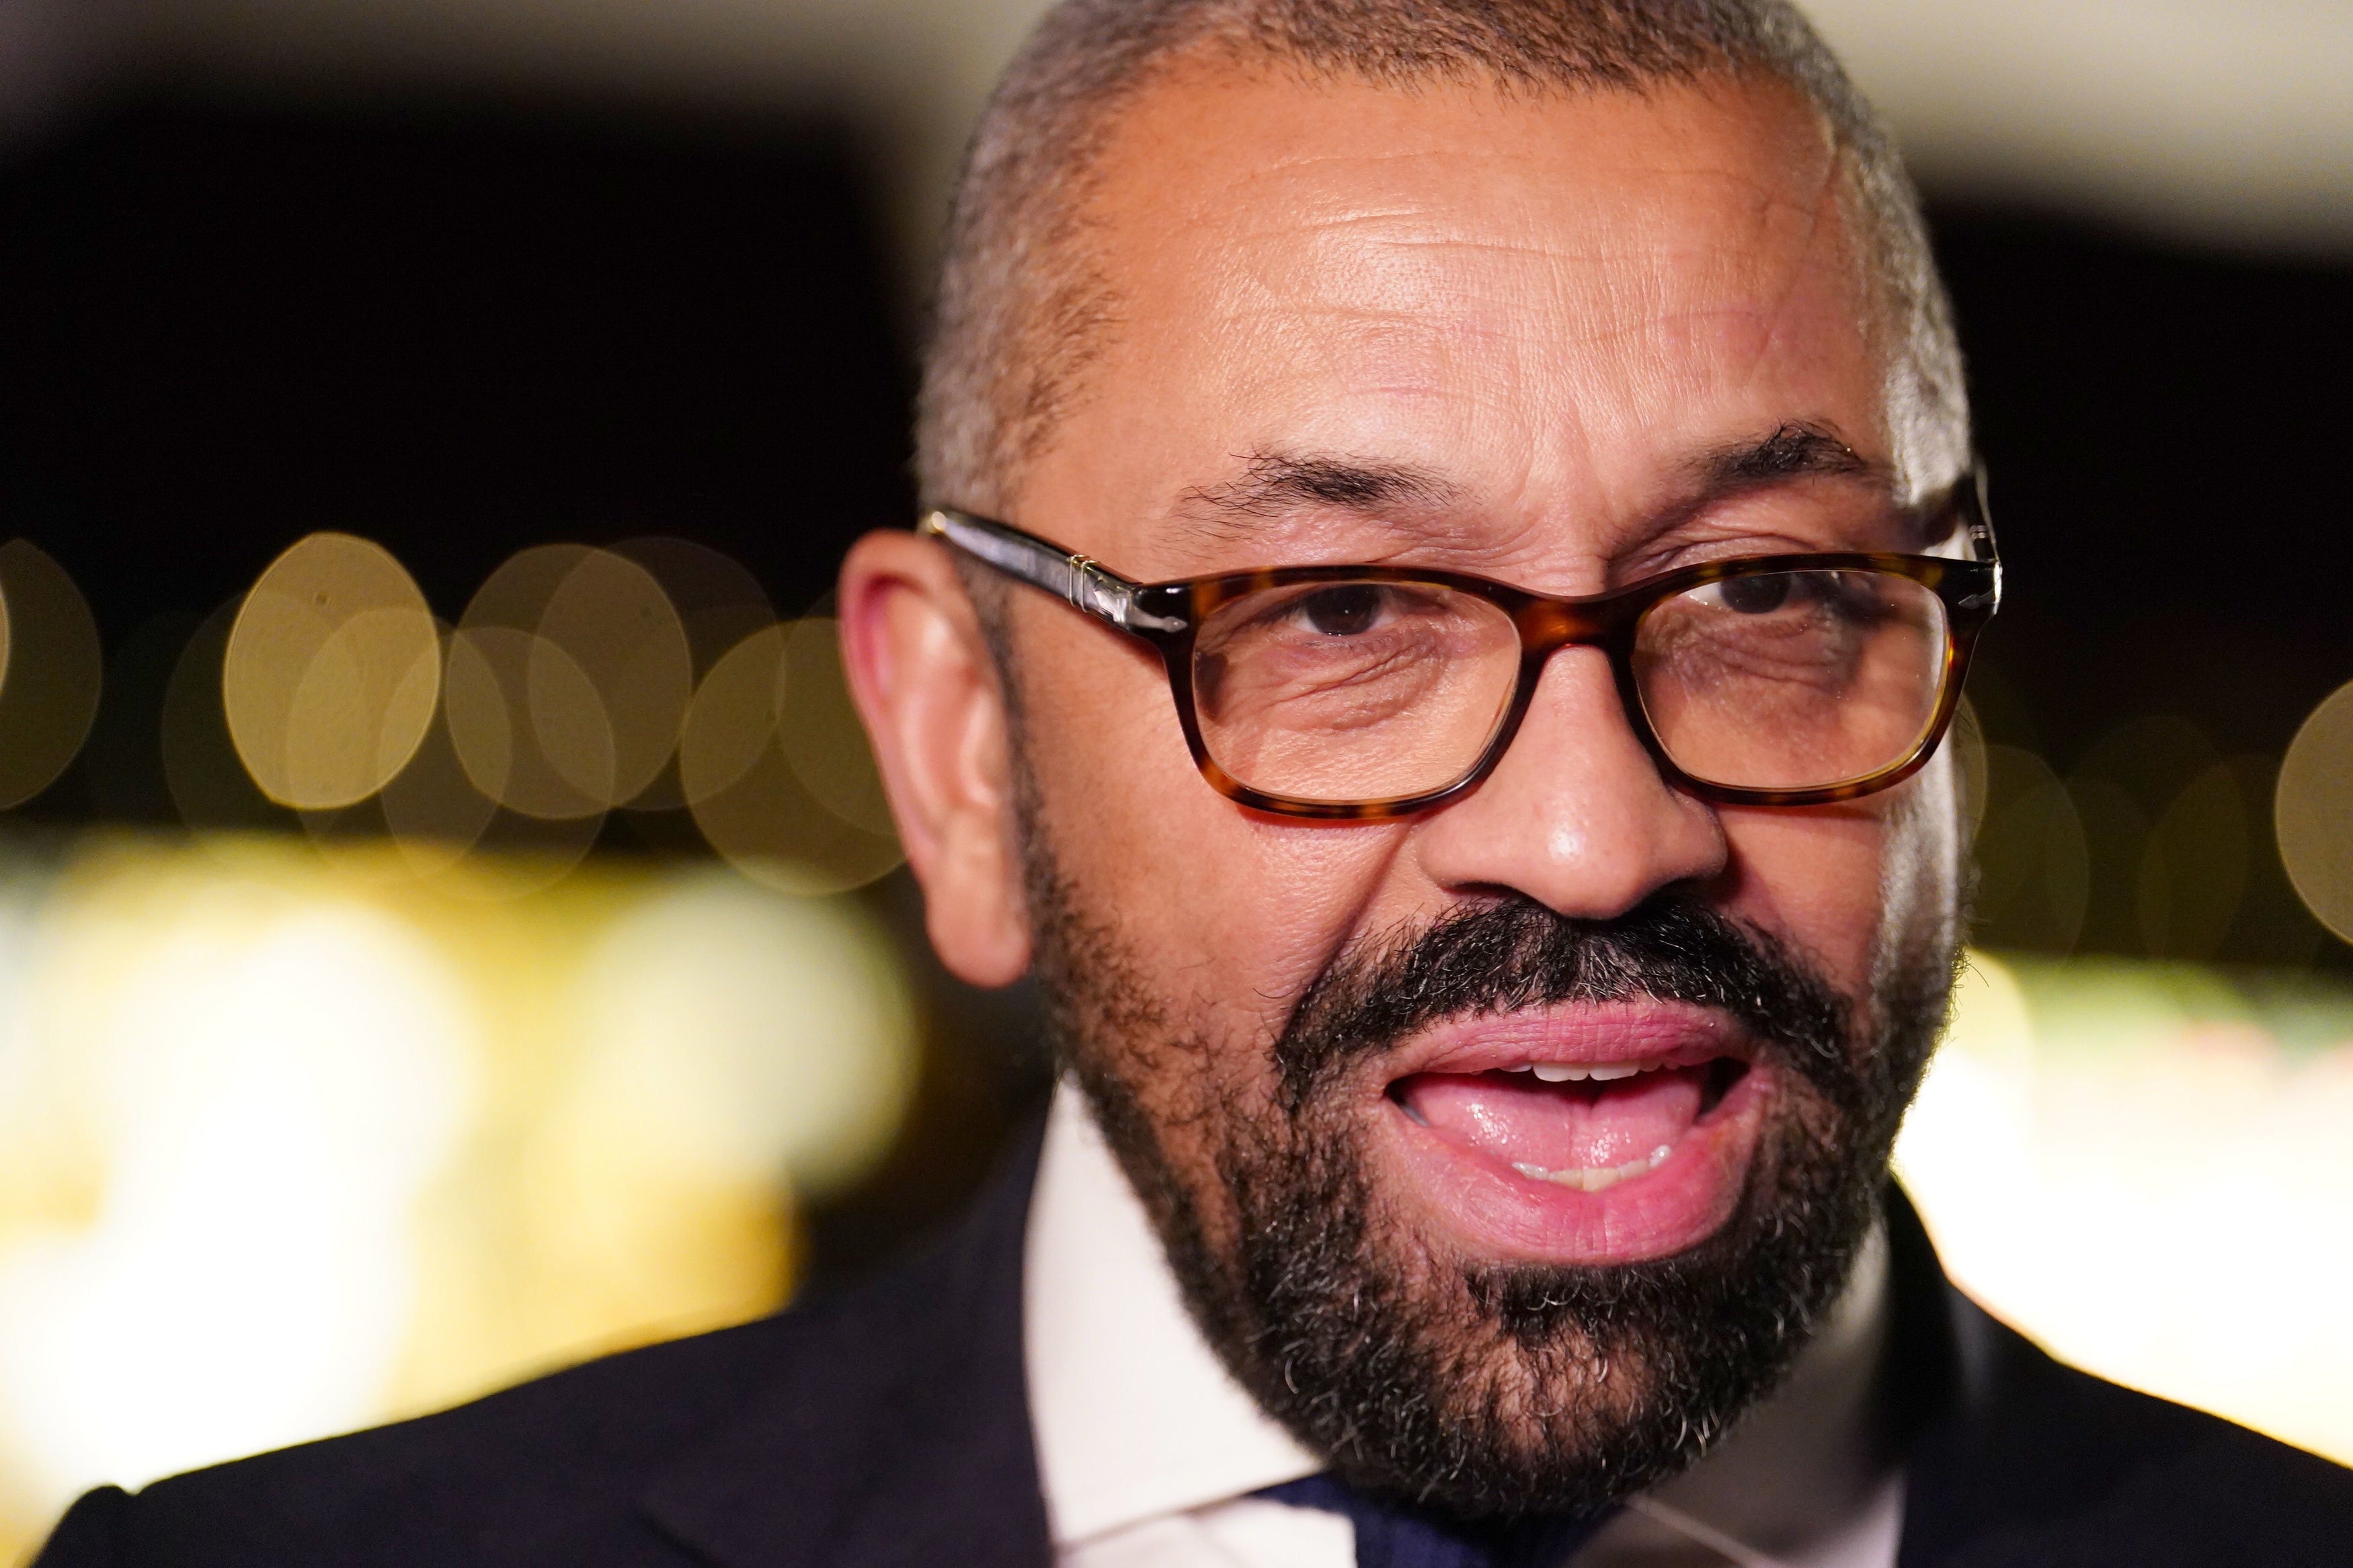 James Cleverly promised the student visa crackdown would cut net migration by ‘tens of thousands’